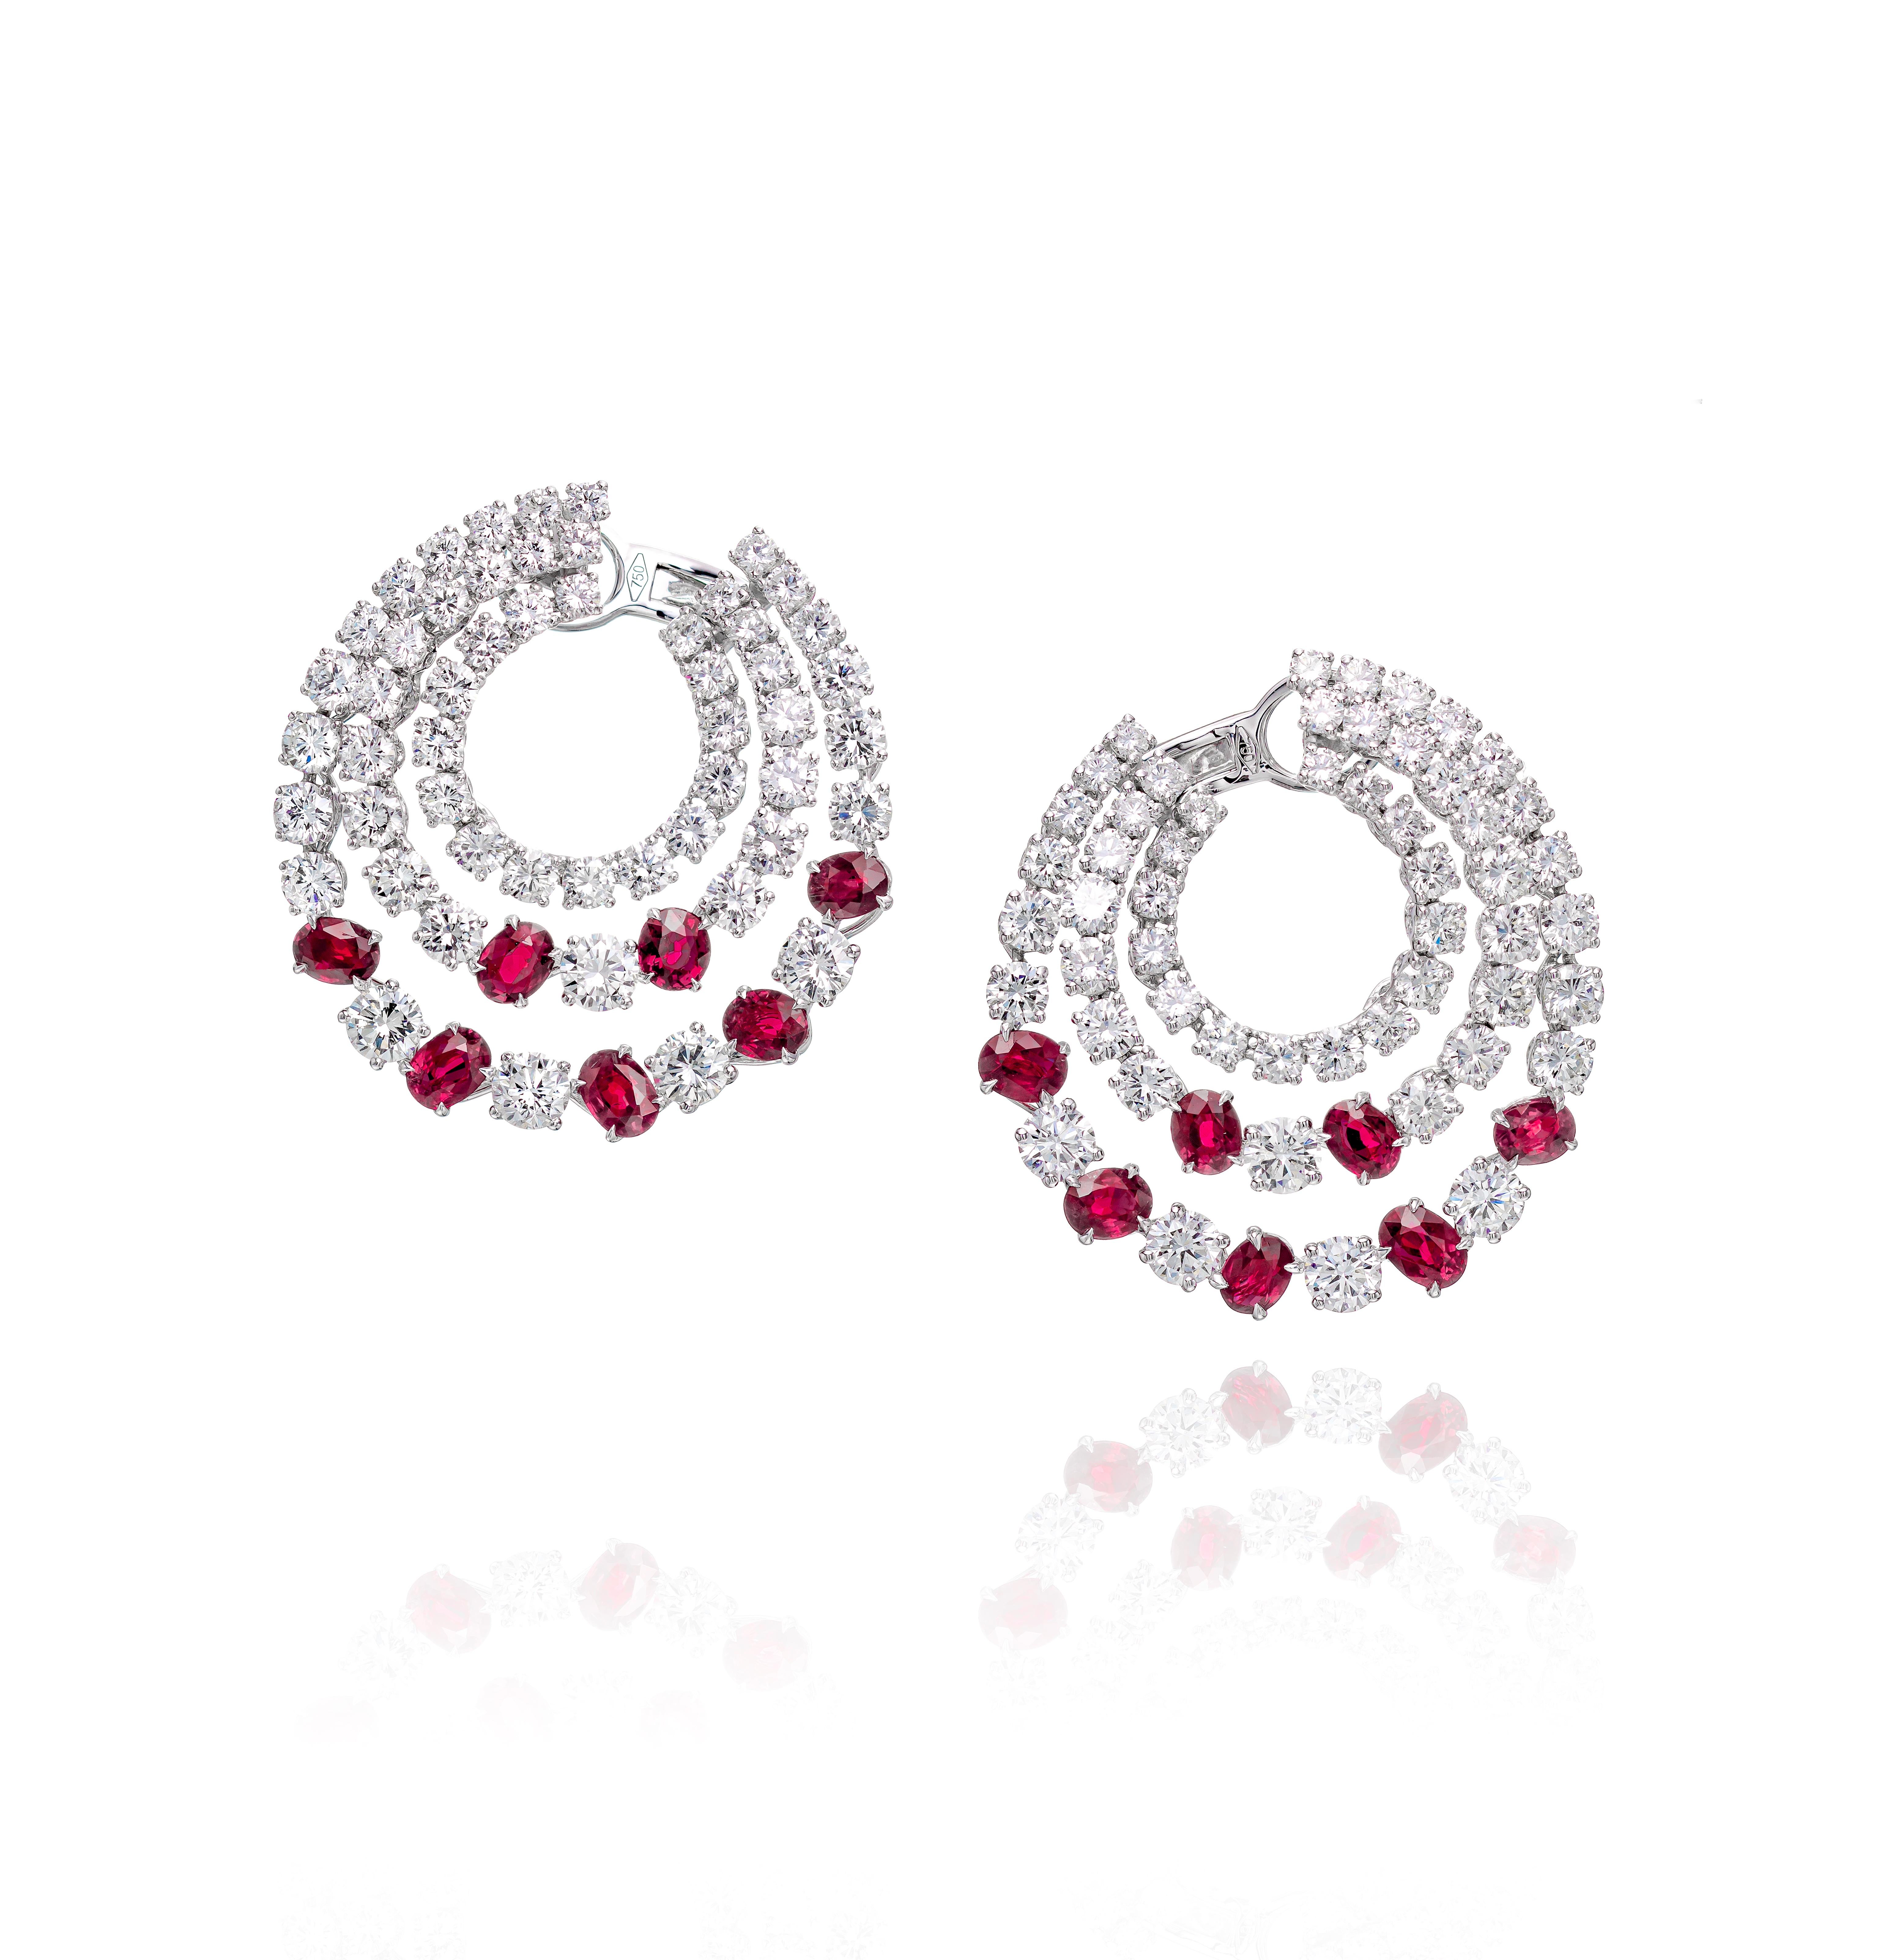 Contemporary 17.48 Carat Ruby and Diamond Hoop Earrings in 18K White Gold For Sale